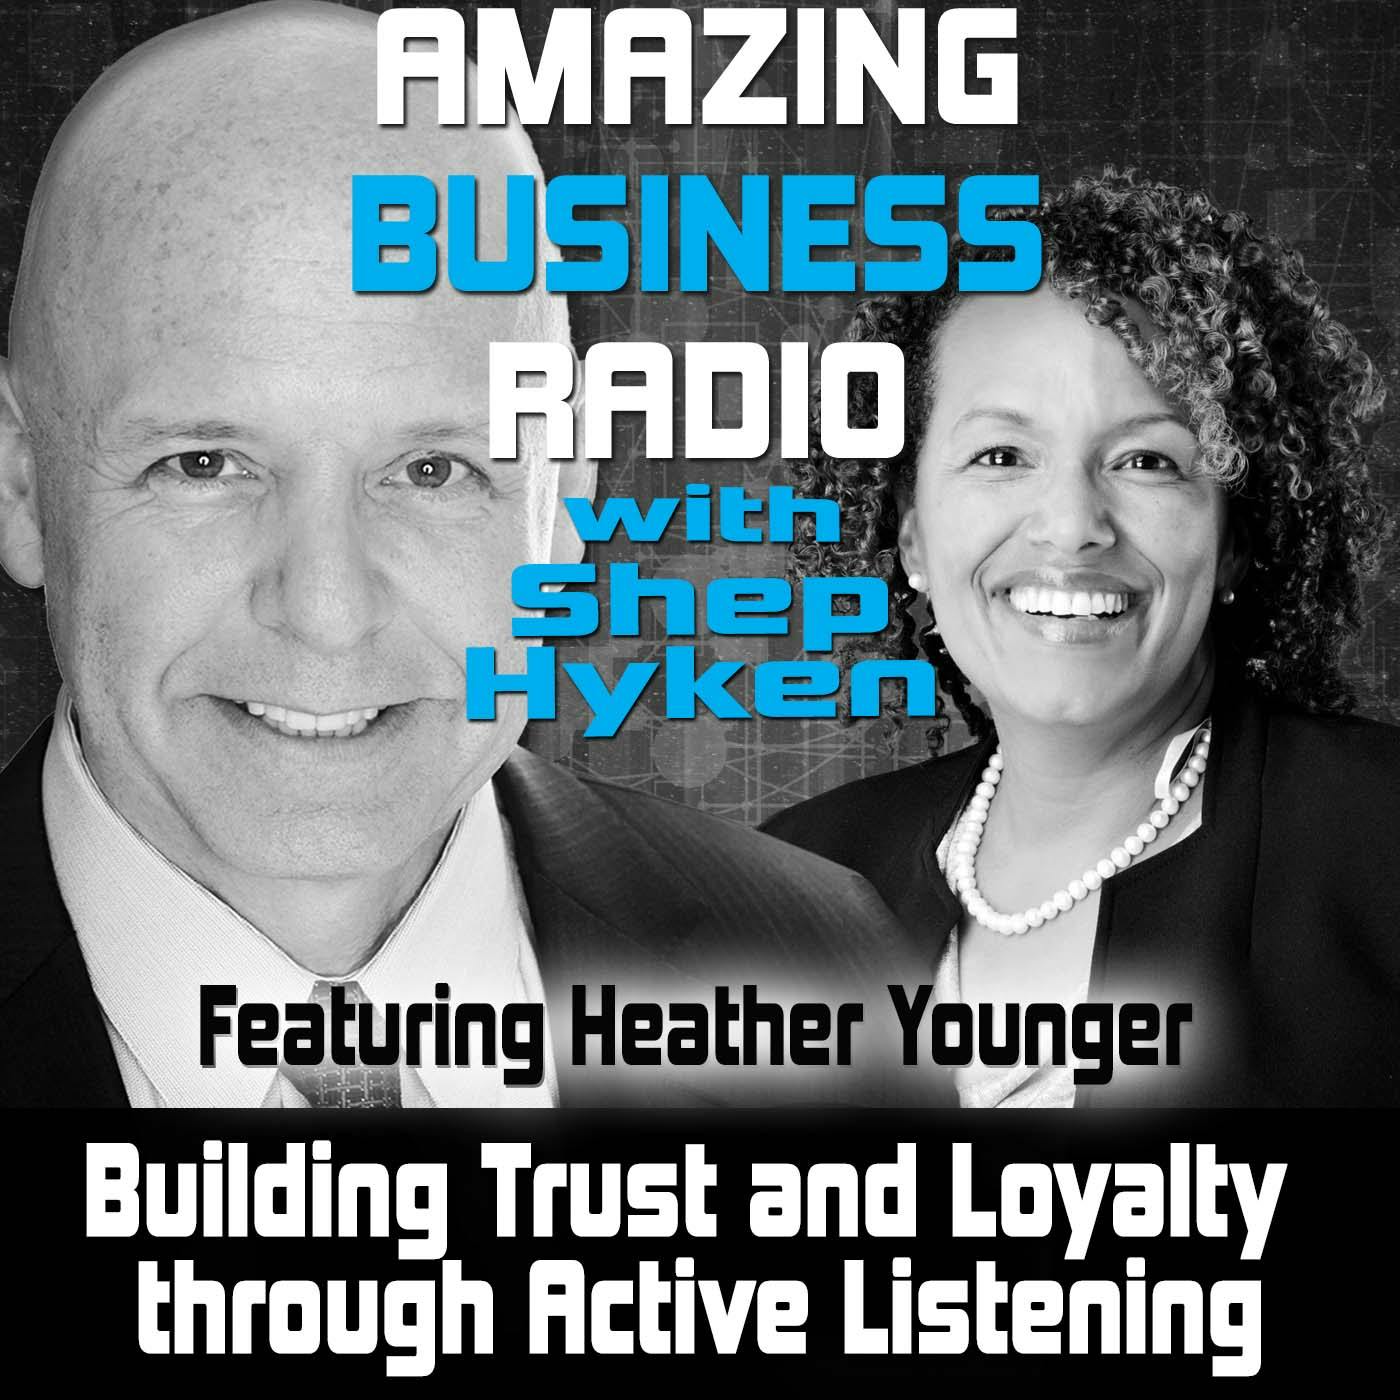 Building Trust and Loyalty through Active Listening Featuring Heather Younger